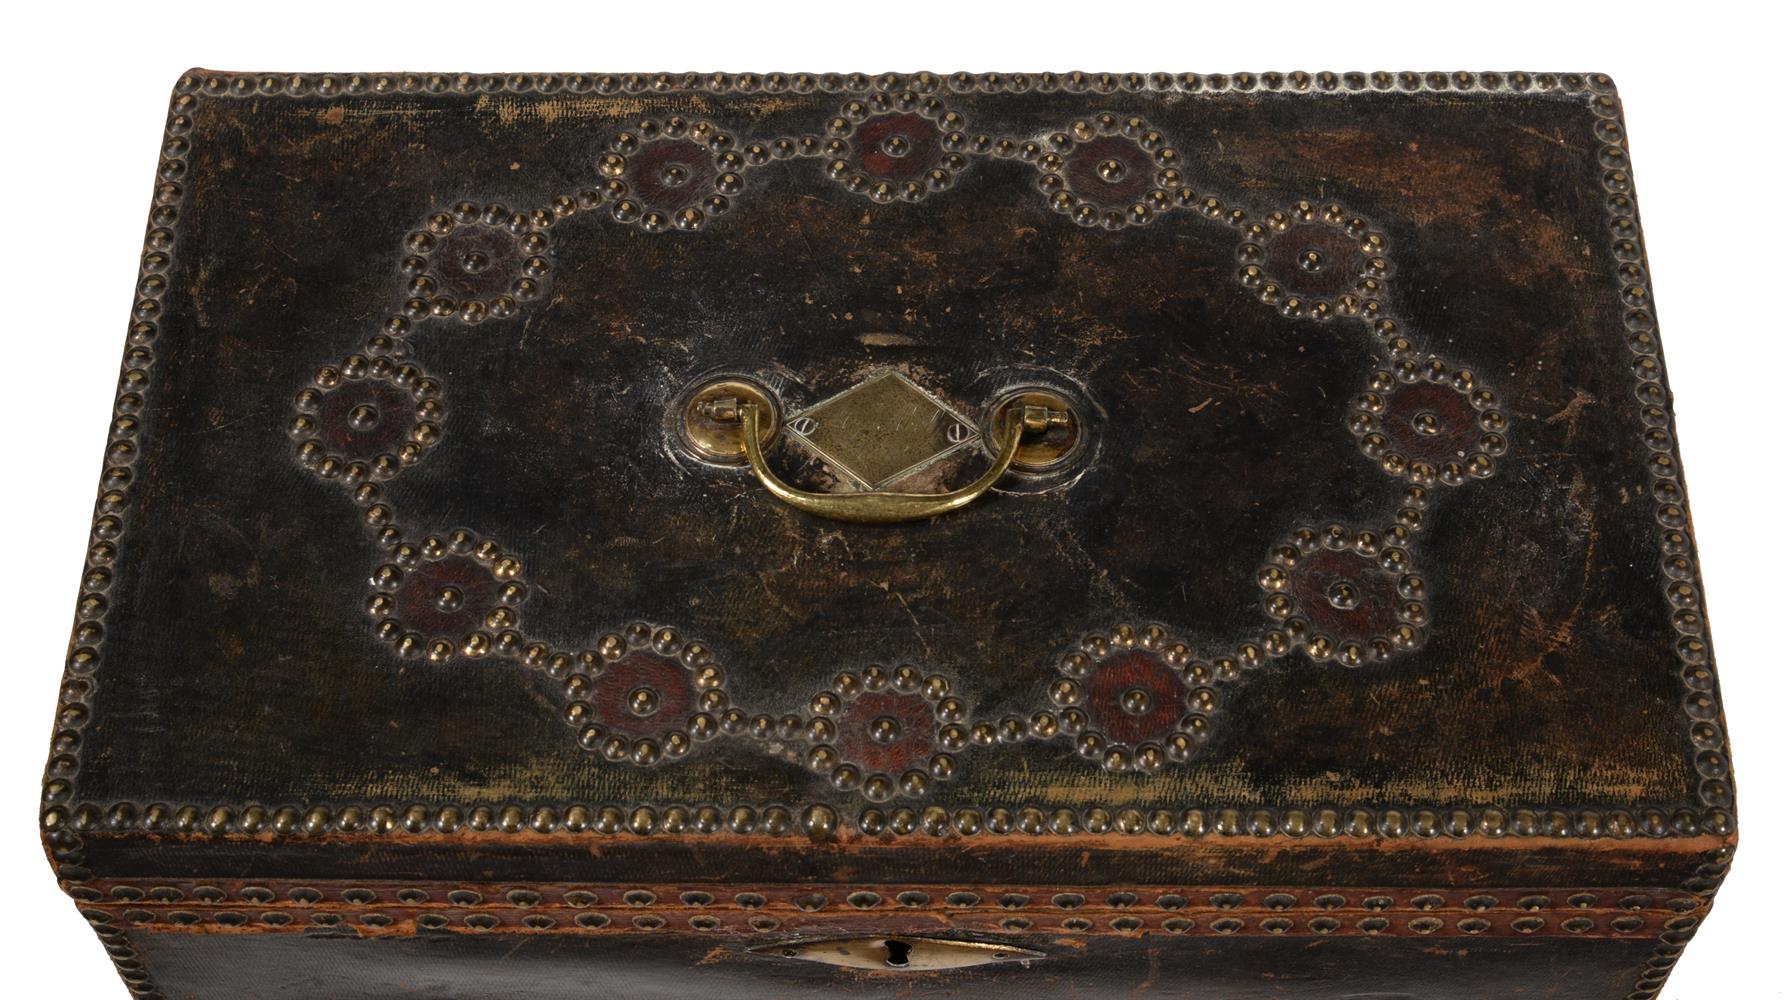 A REGENCY LEATHER AND STUDDED TRUNK, CIRCA 1818 - Image 2 of 3